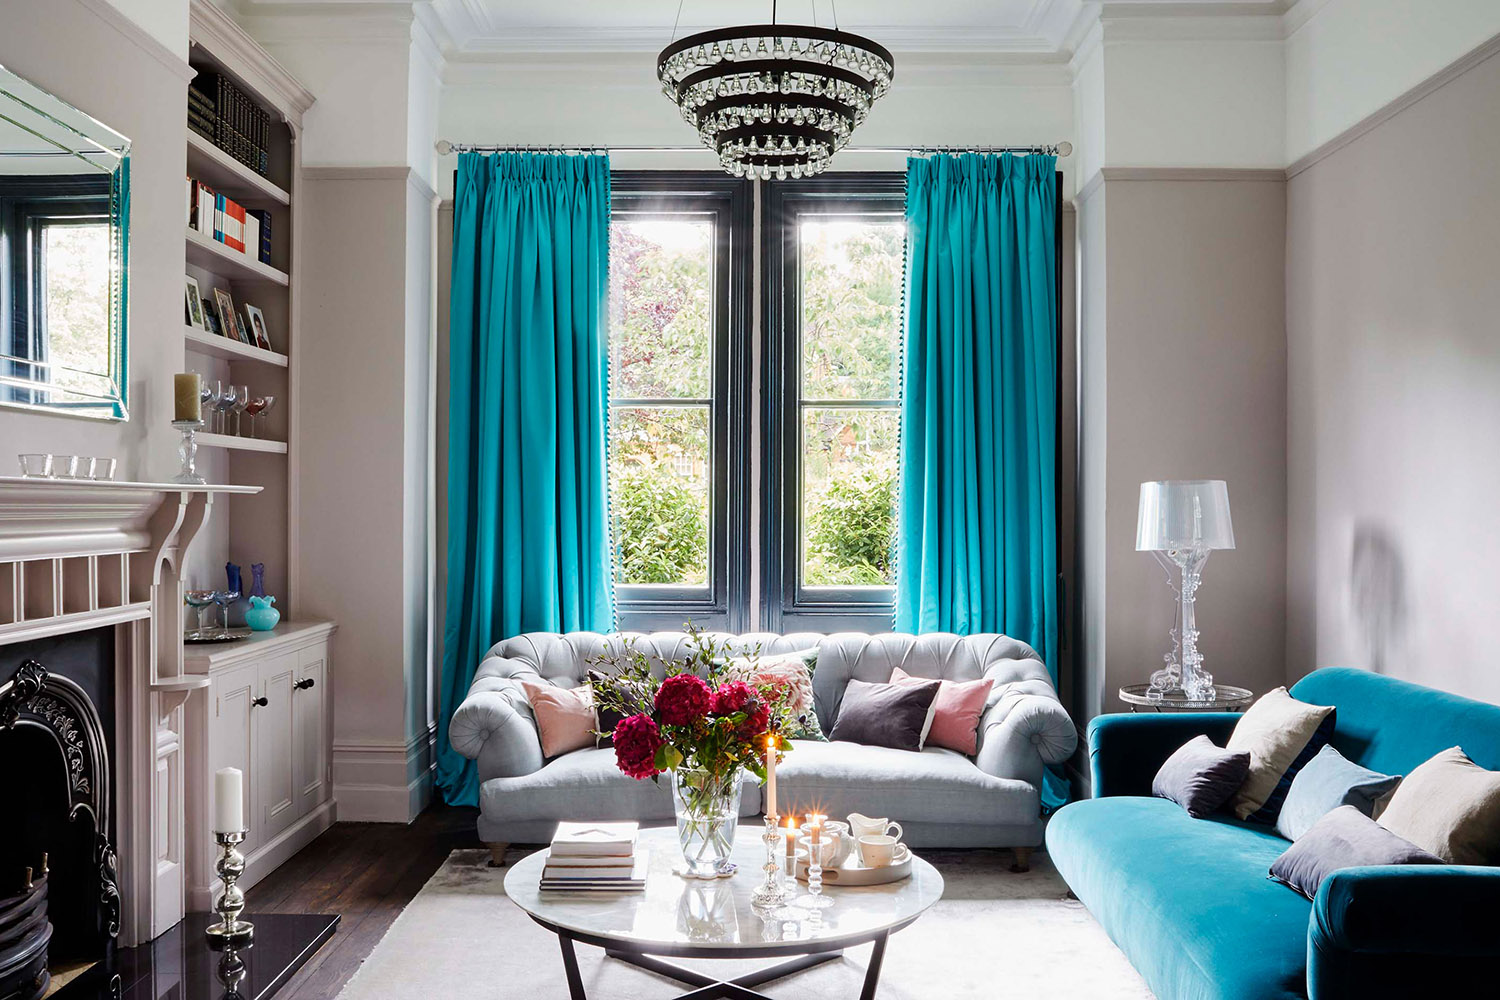 Decorating with Turquoise Blue